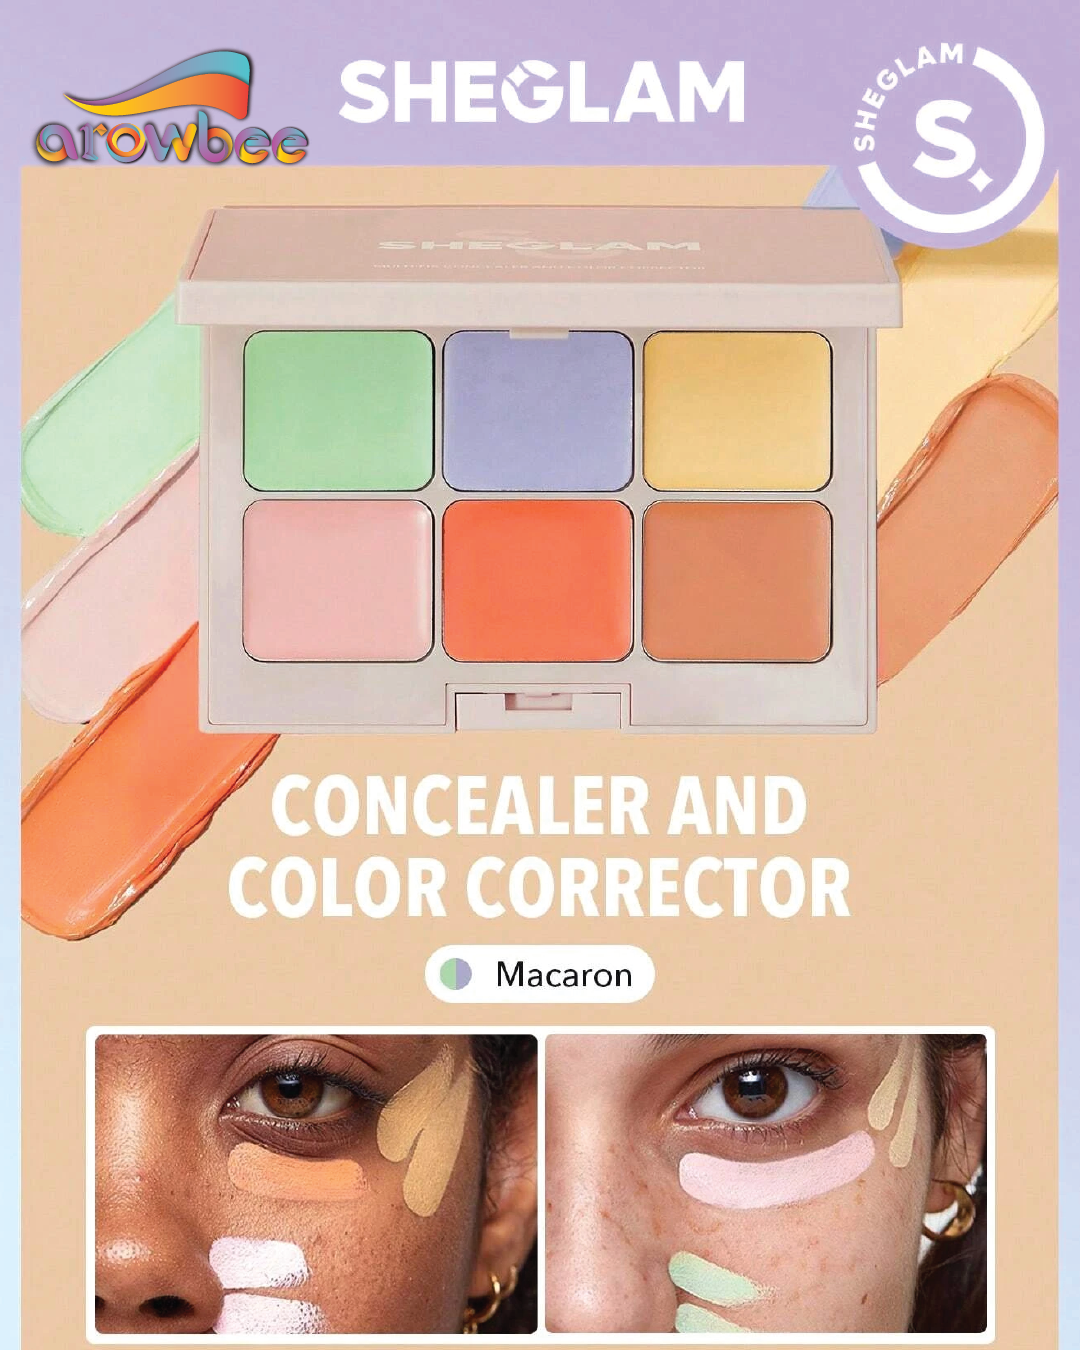 SHEGLAM Multi-Fix Concealer And Color Corrector